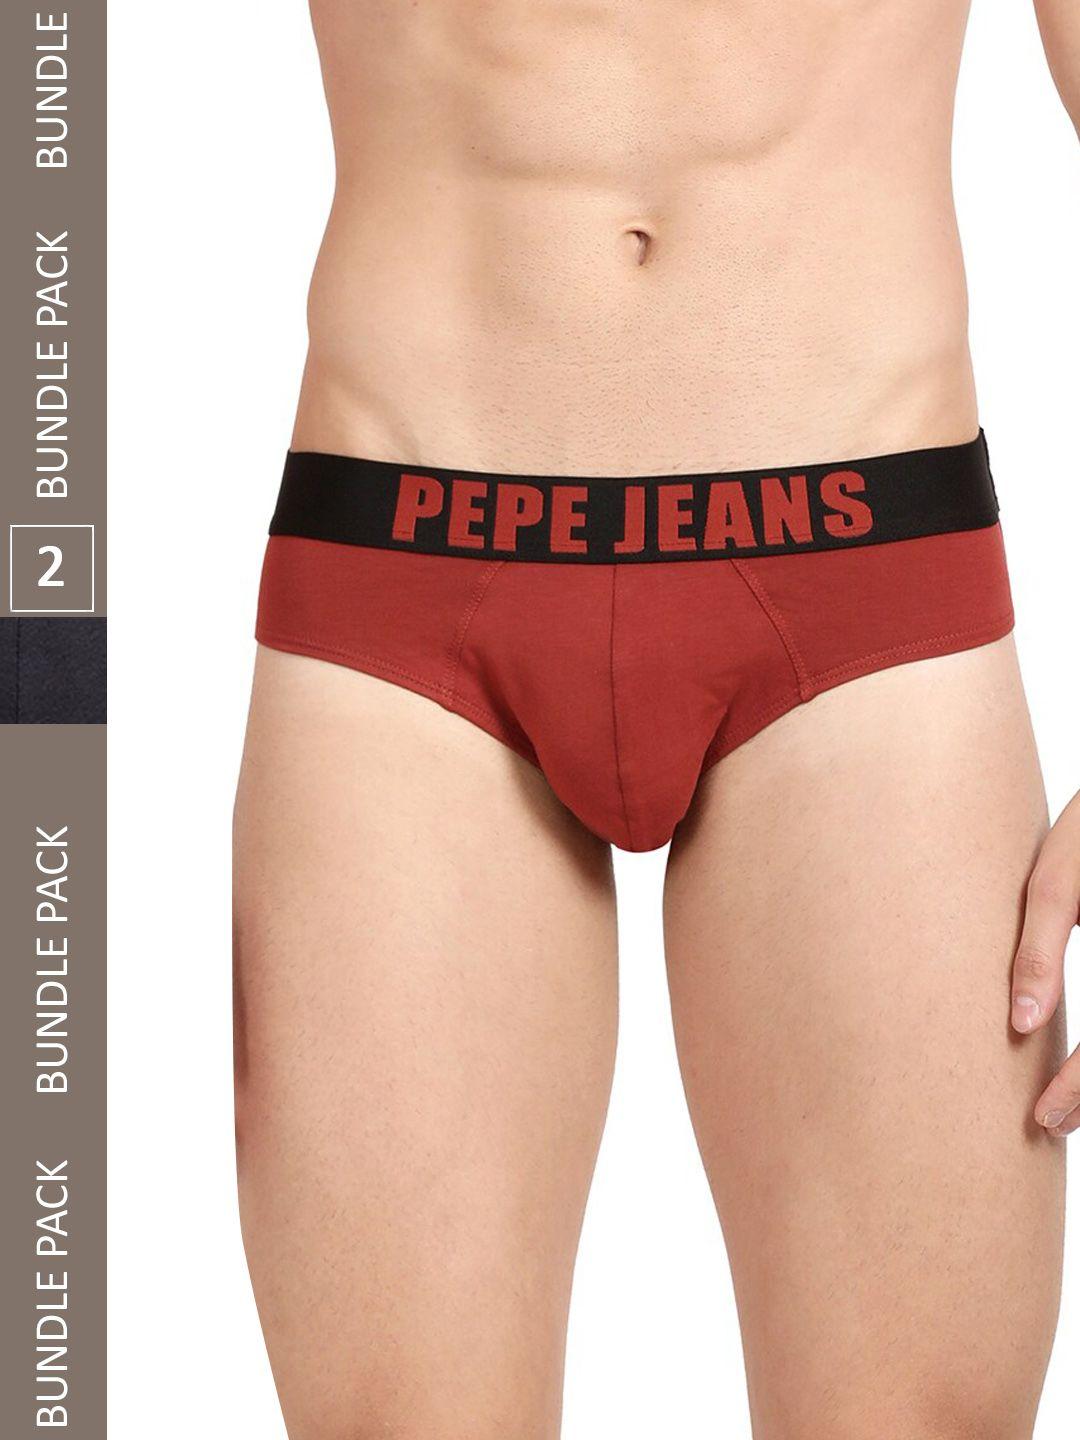 pepe jeans men pack of 2 cotton basic briefs